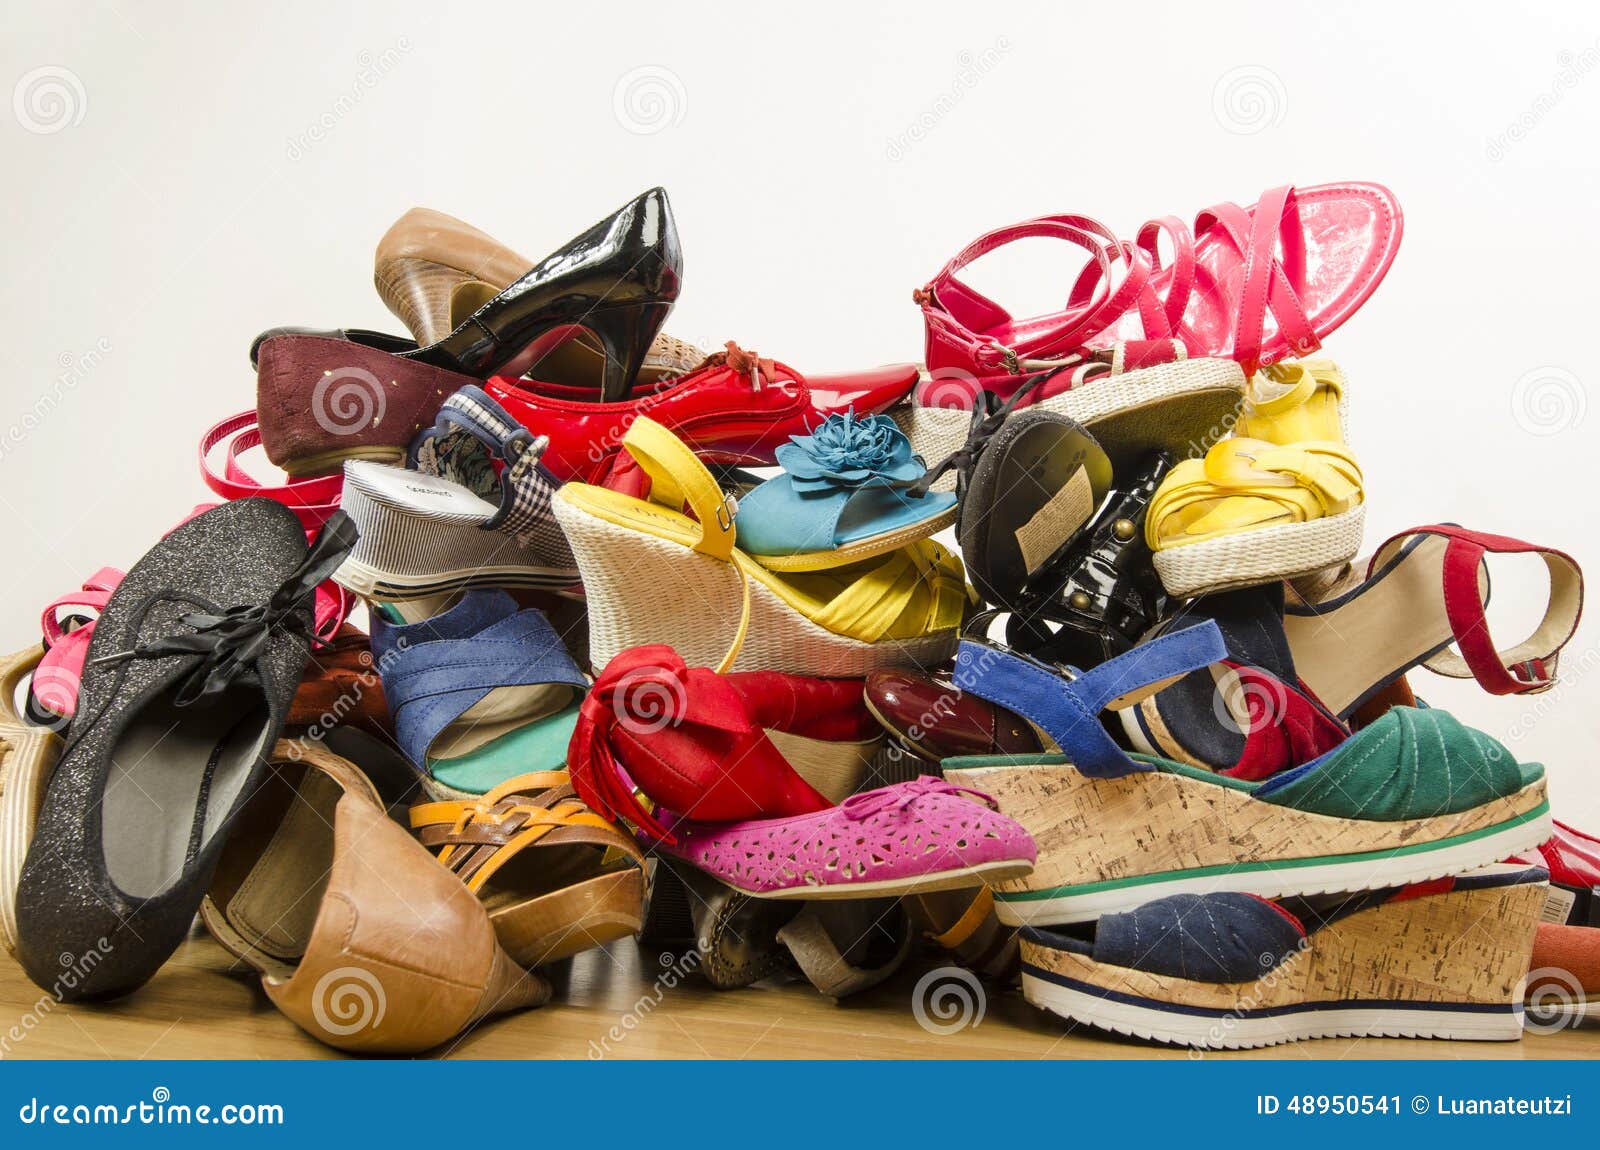 close-up-big-pile-colorful-woman-shoes-untidy-stack-thrown-ground-48950541.jpg